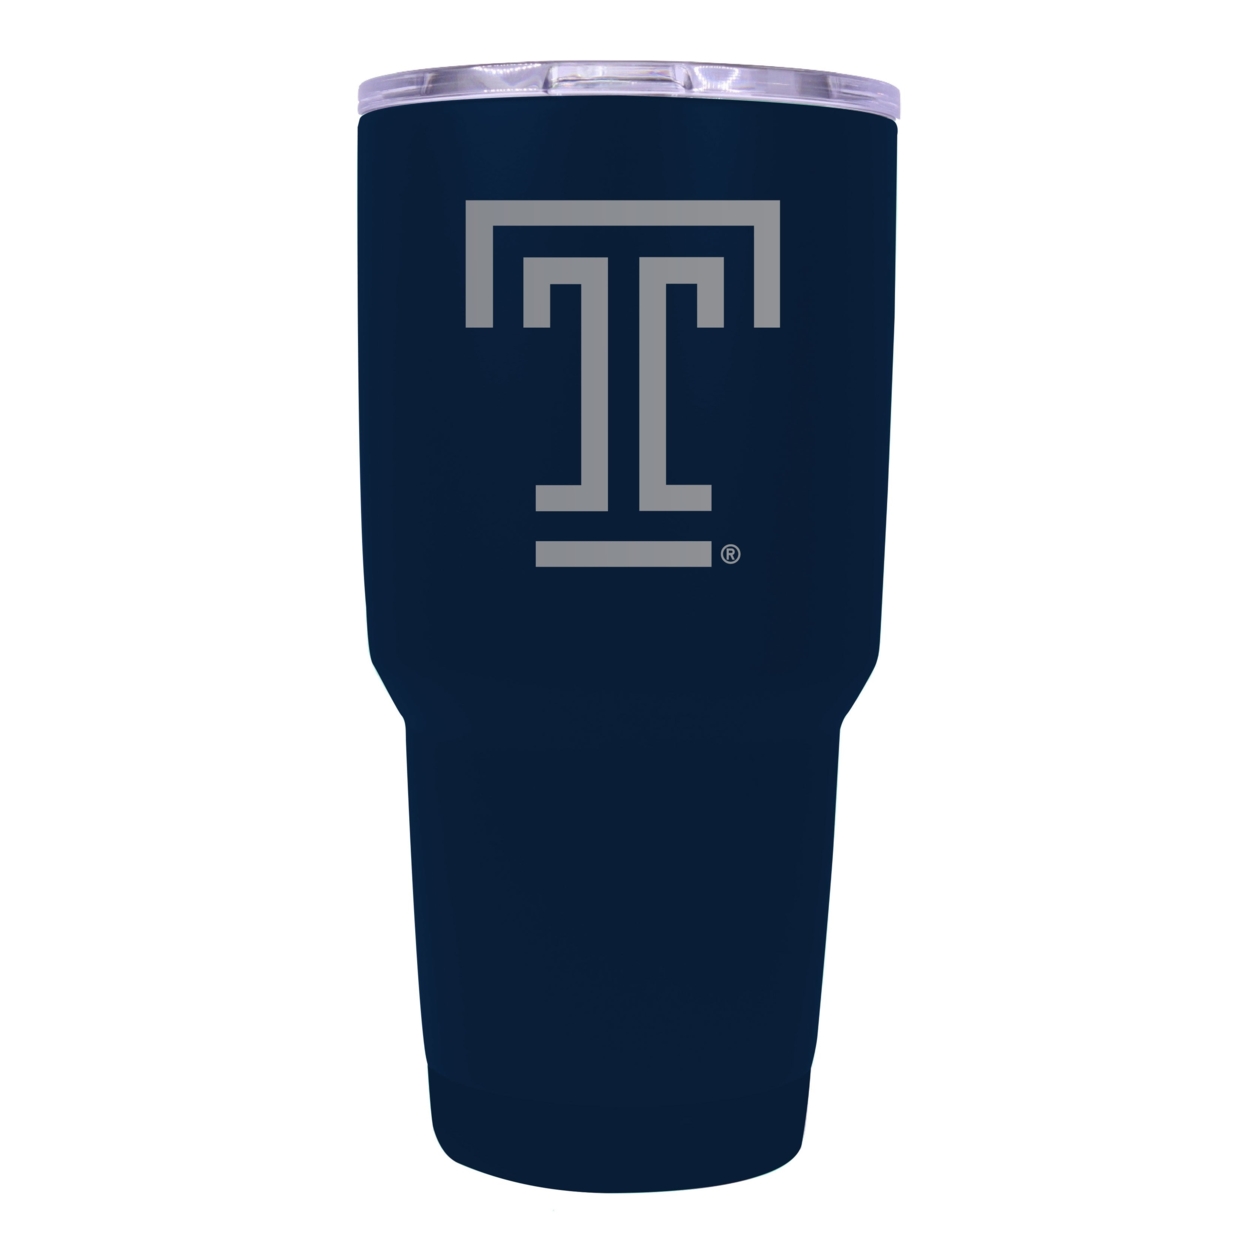 Temple University 24 Oz Laser Engraved Stainless Steel Insulated Tumbler - Choose Your Color. - Navy